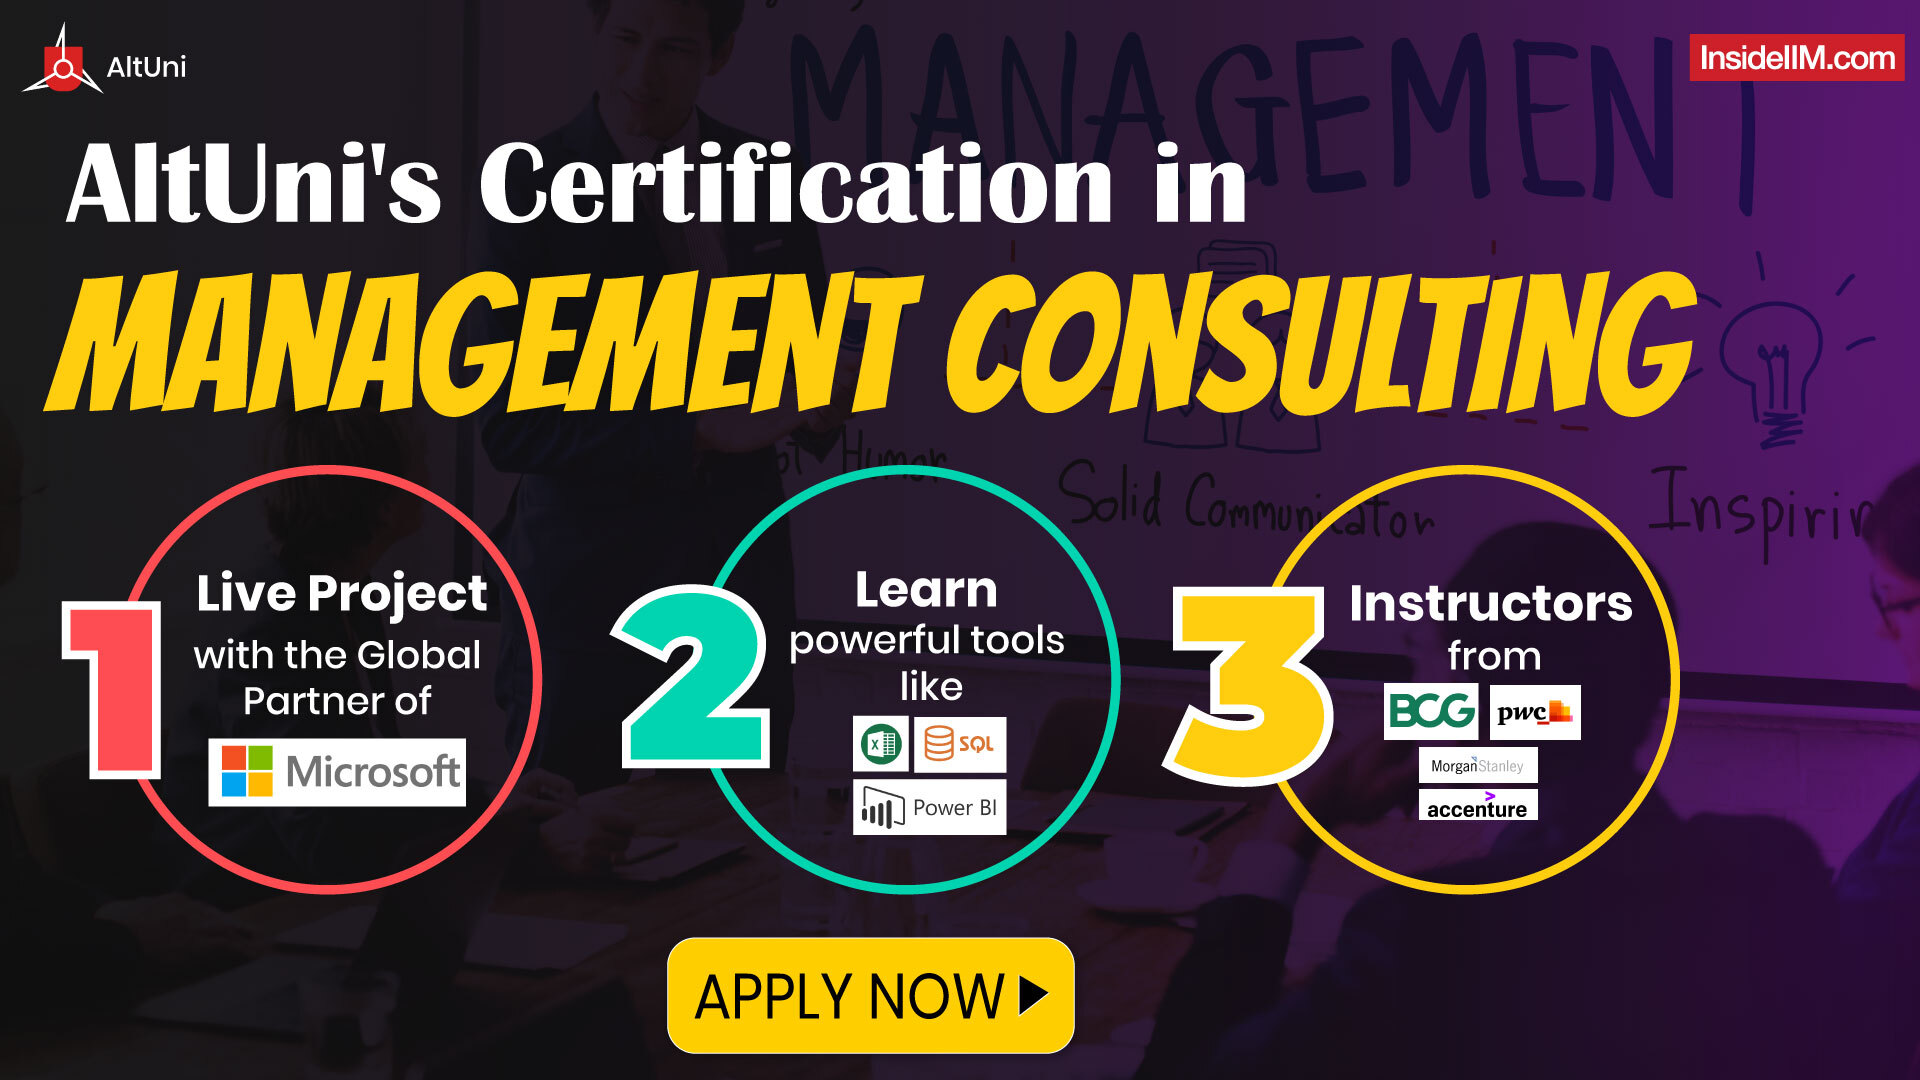 Try out AltUni's Certificate Program In Management Consulting and fast track your way to success!